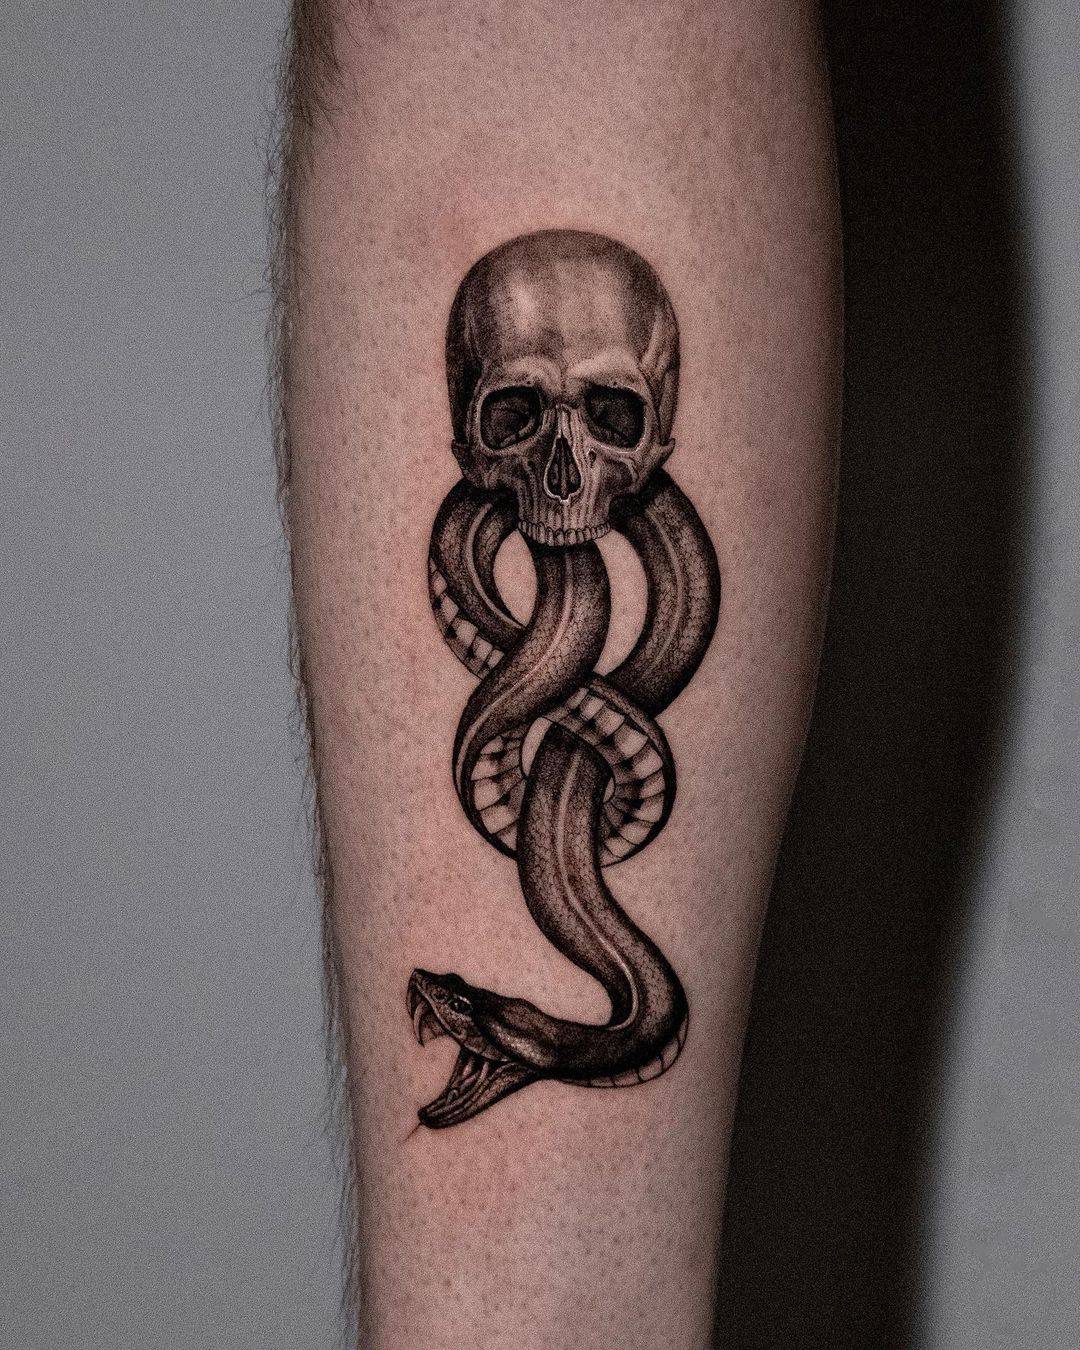 Snake tattoo by ygtattoos